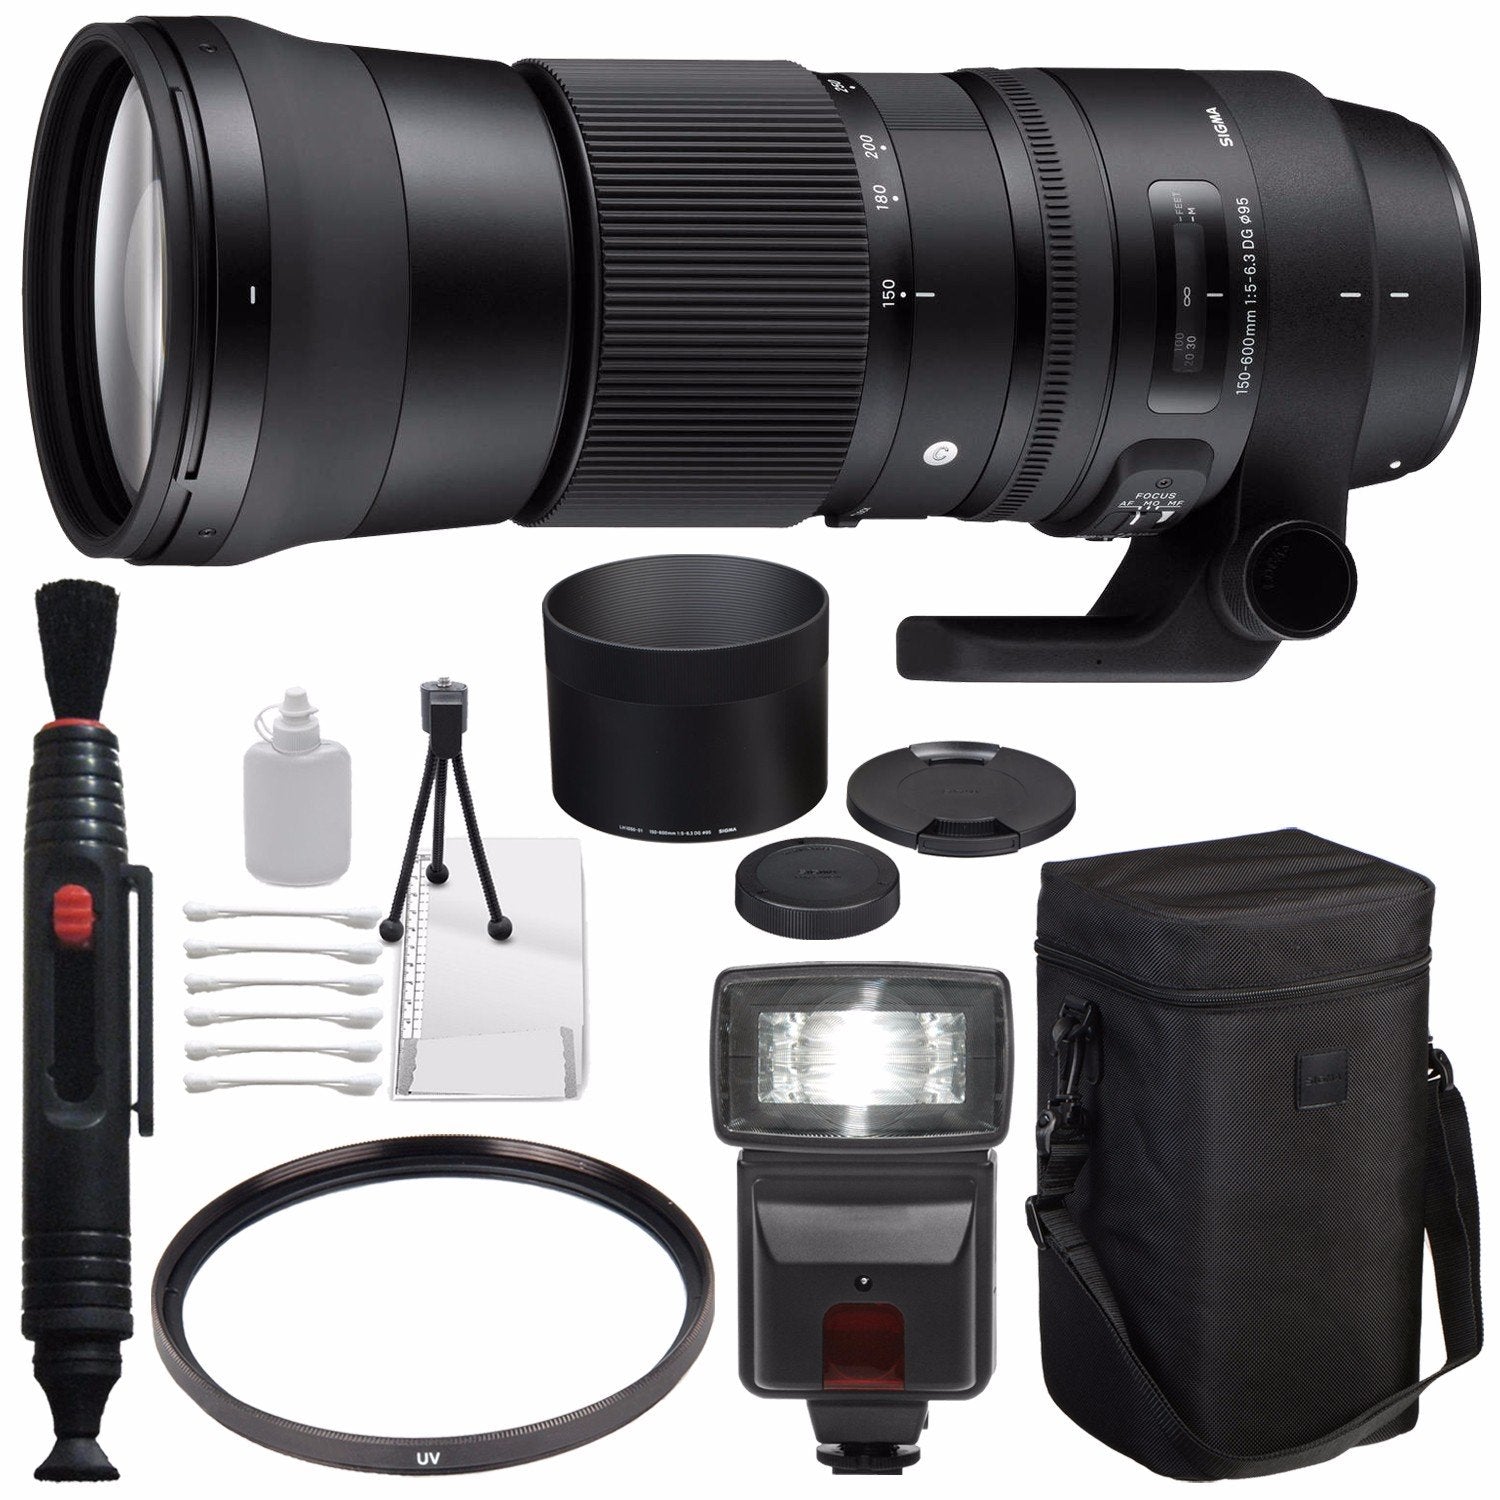 Sigma 150-600mm f/5-6.3 DG OS HSM Contemporary Lens for Canon EF + 95mm UV Filter + Deluxe Cleaning Kit + Lens Cleaning